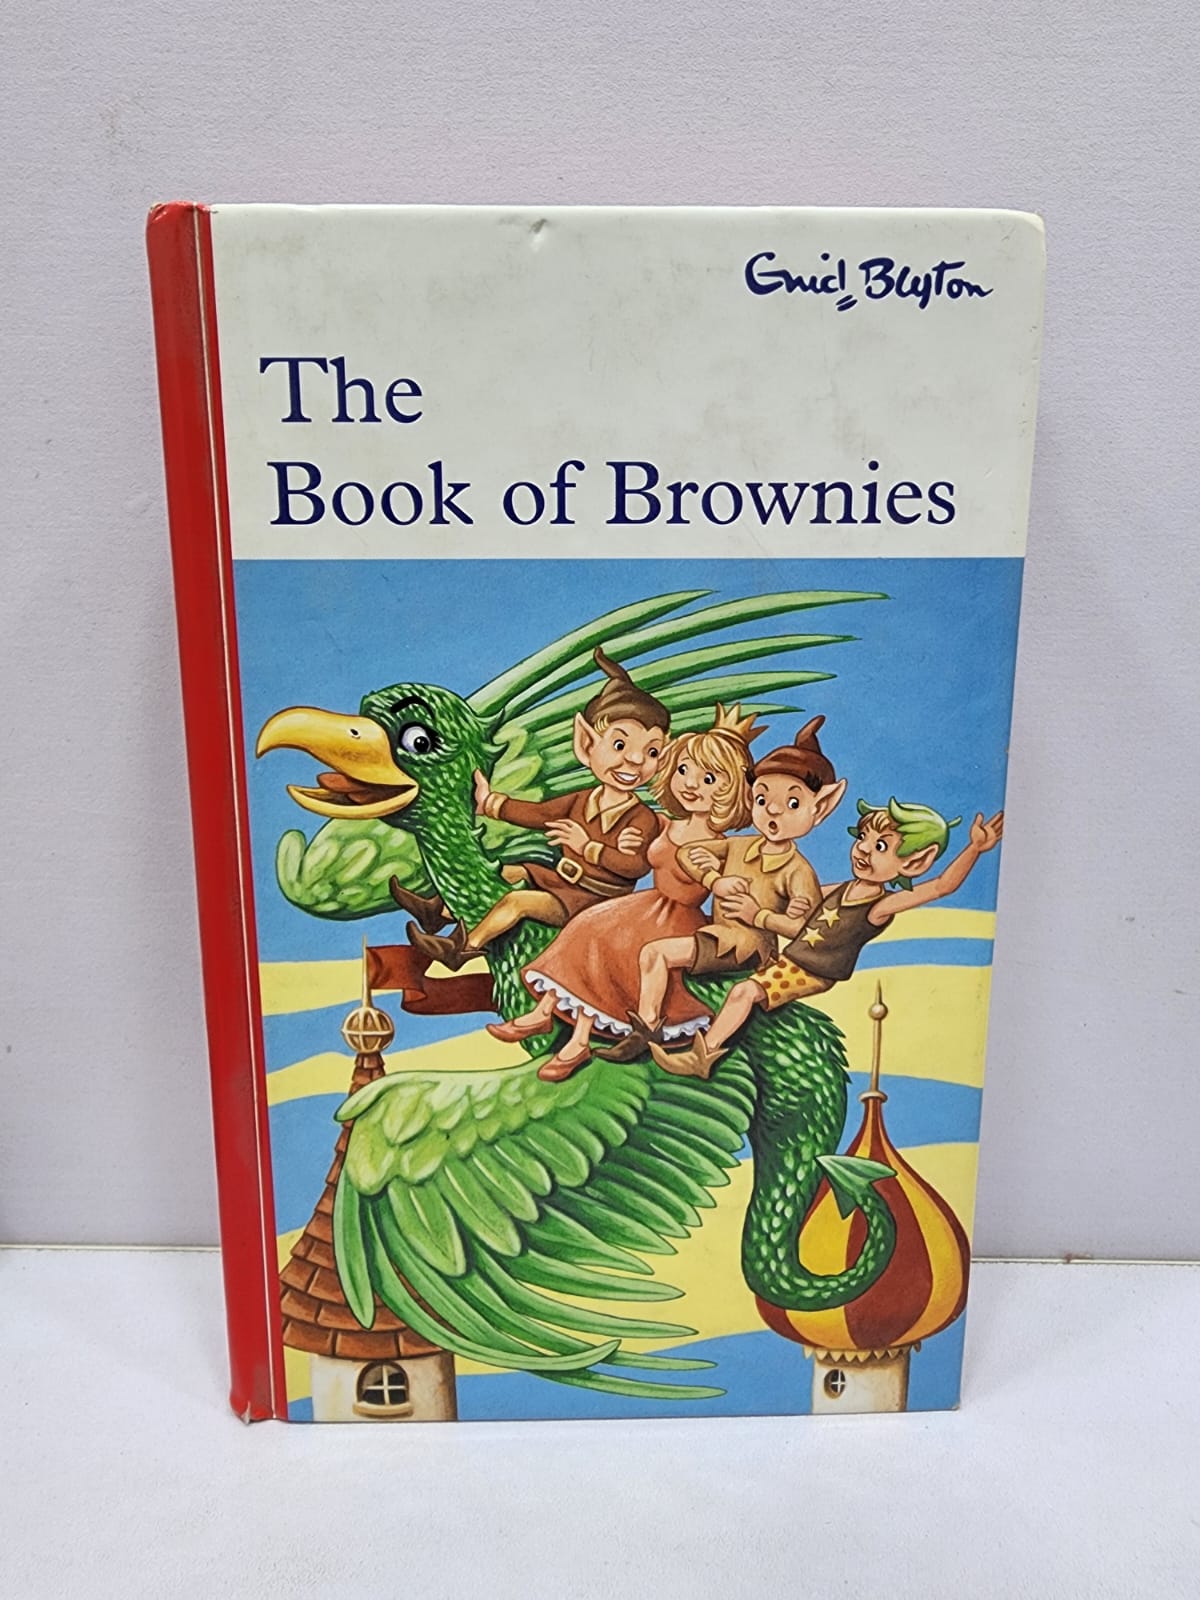 The Book of Brownies : Enid Blyton : Hardcover